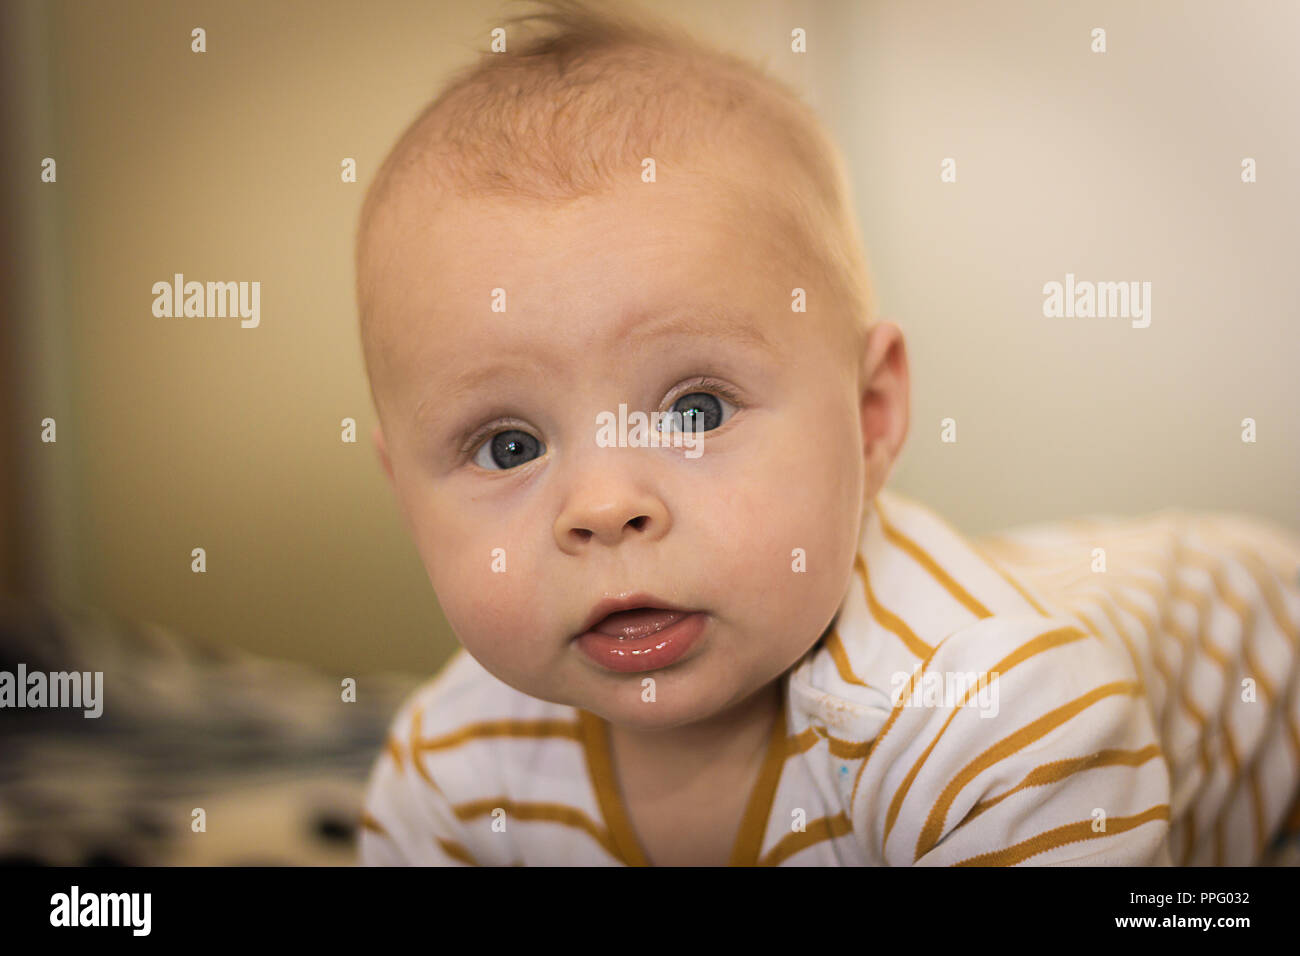 Portrait of a expressive happy baby, holds head up. baby development concept photo, lifestyle. Stock Photo